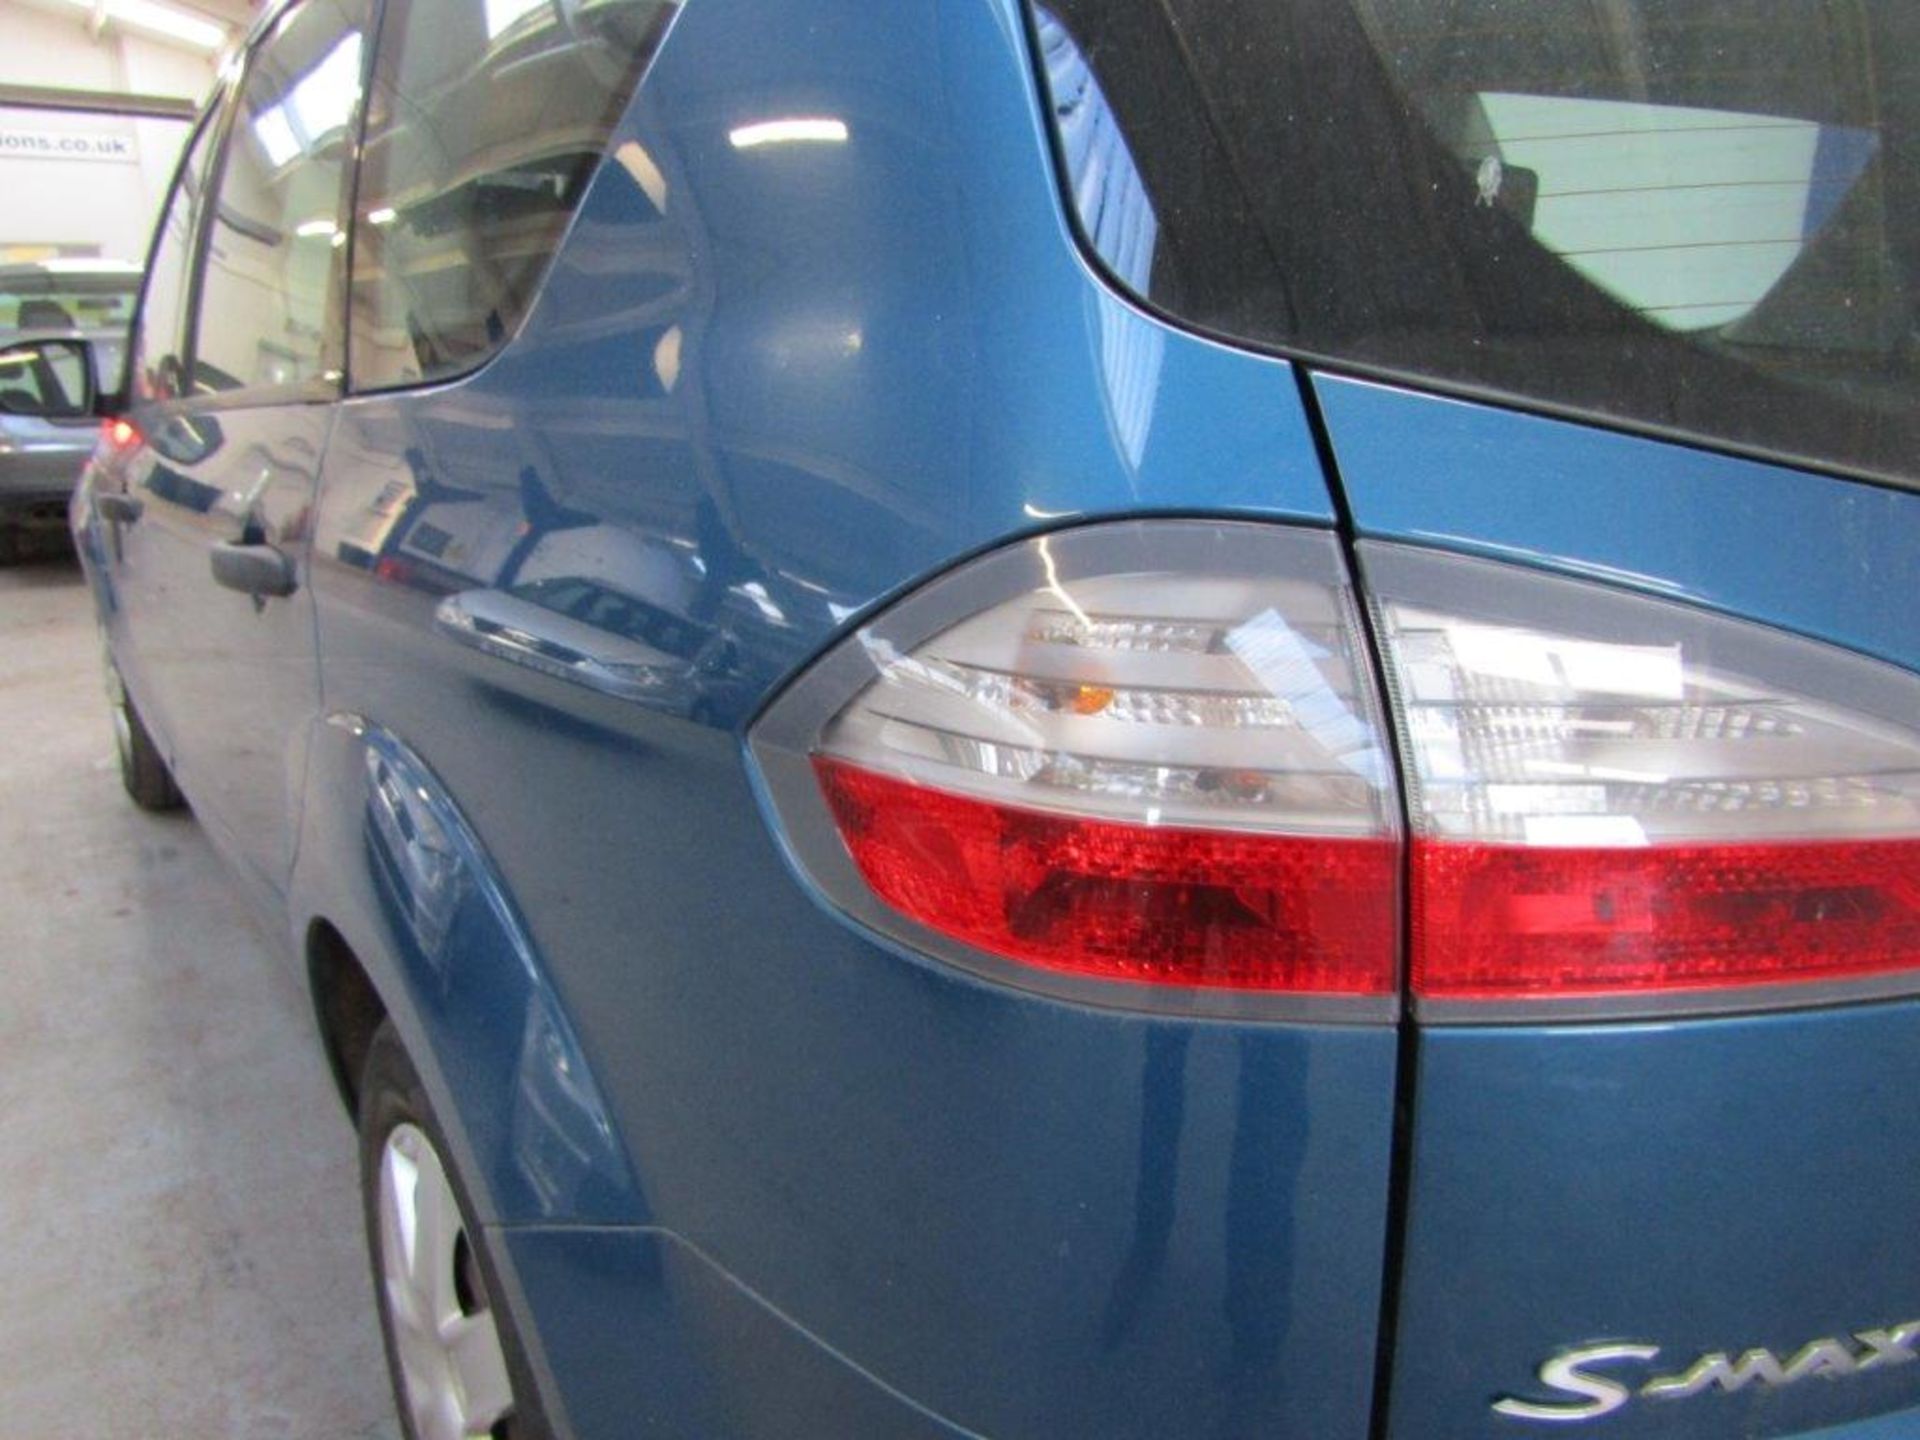 07 07 Ford S-Max LX TDCI - Image 8 of 20